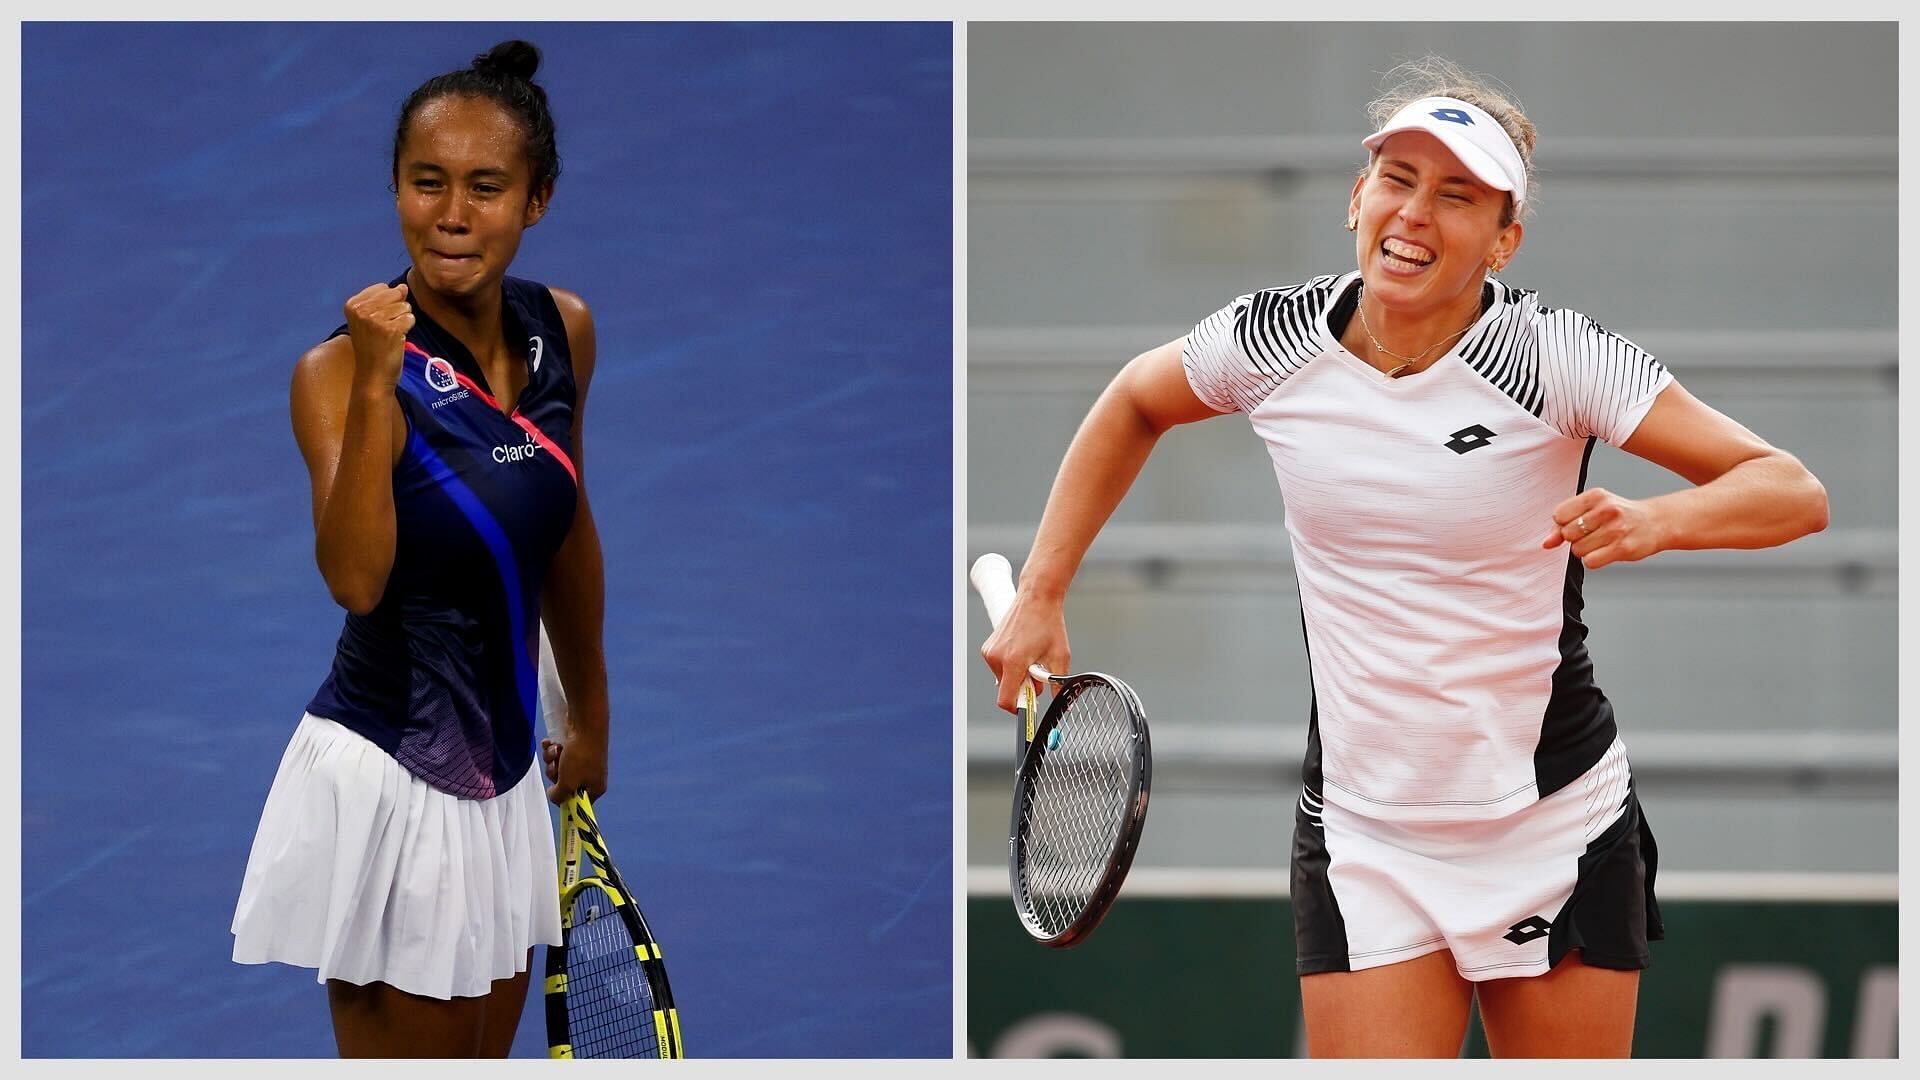 Leylah Fernandez vs Elise Mertens is one of the second round matches at the 2023 Guadalajara Open.